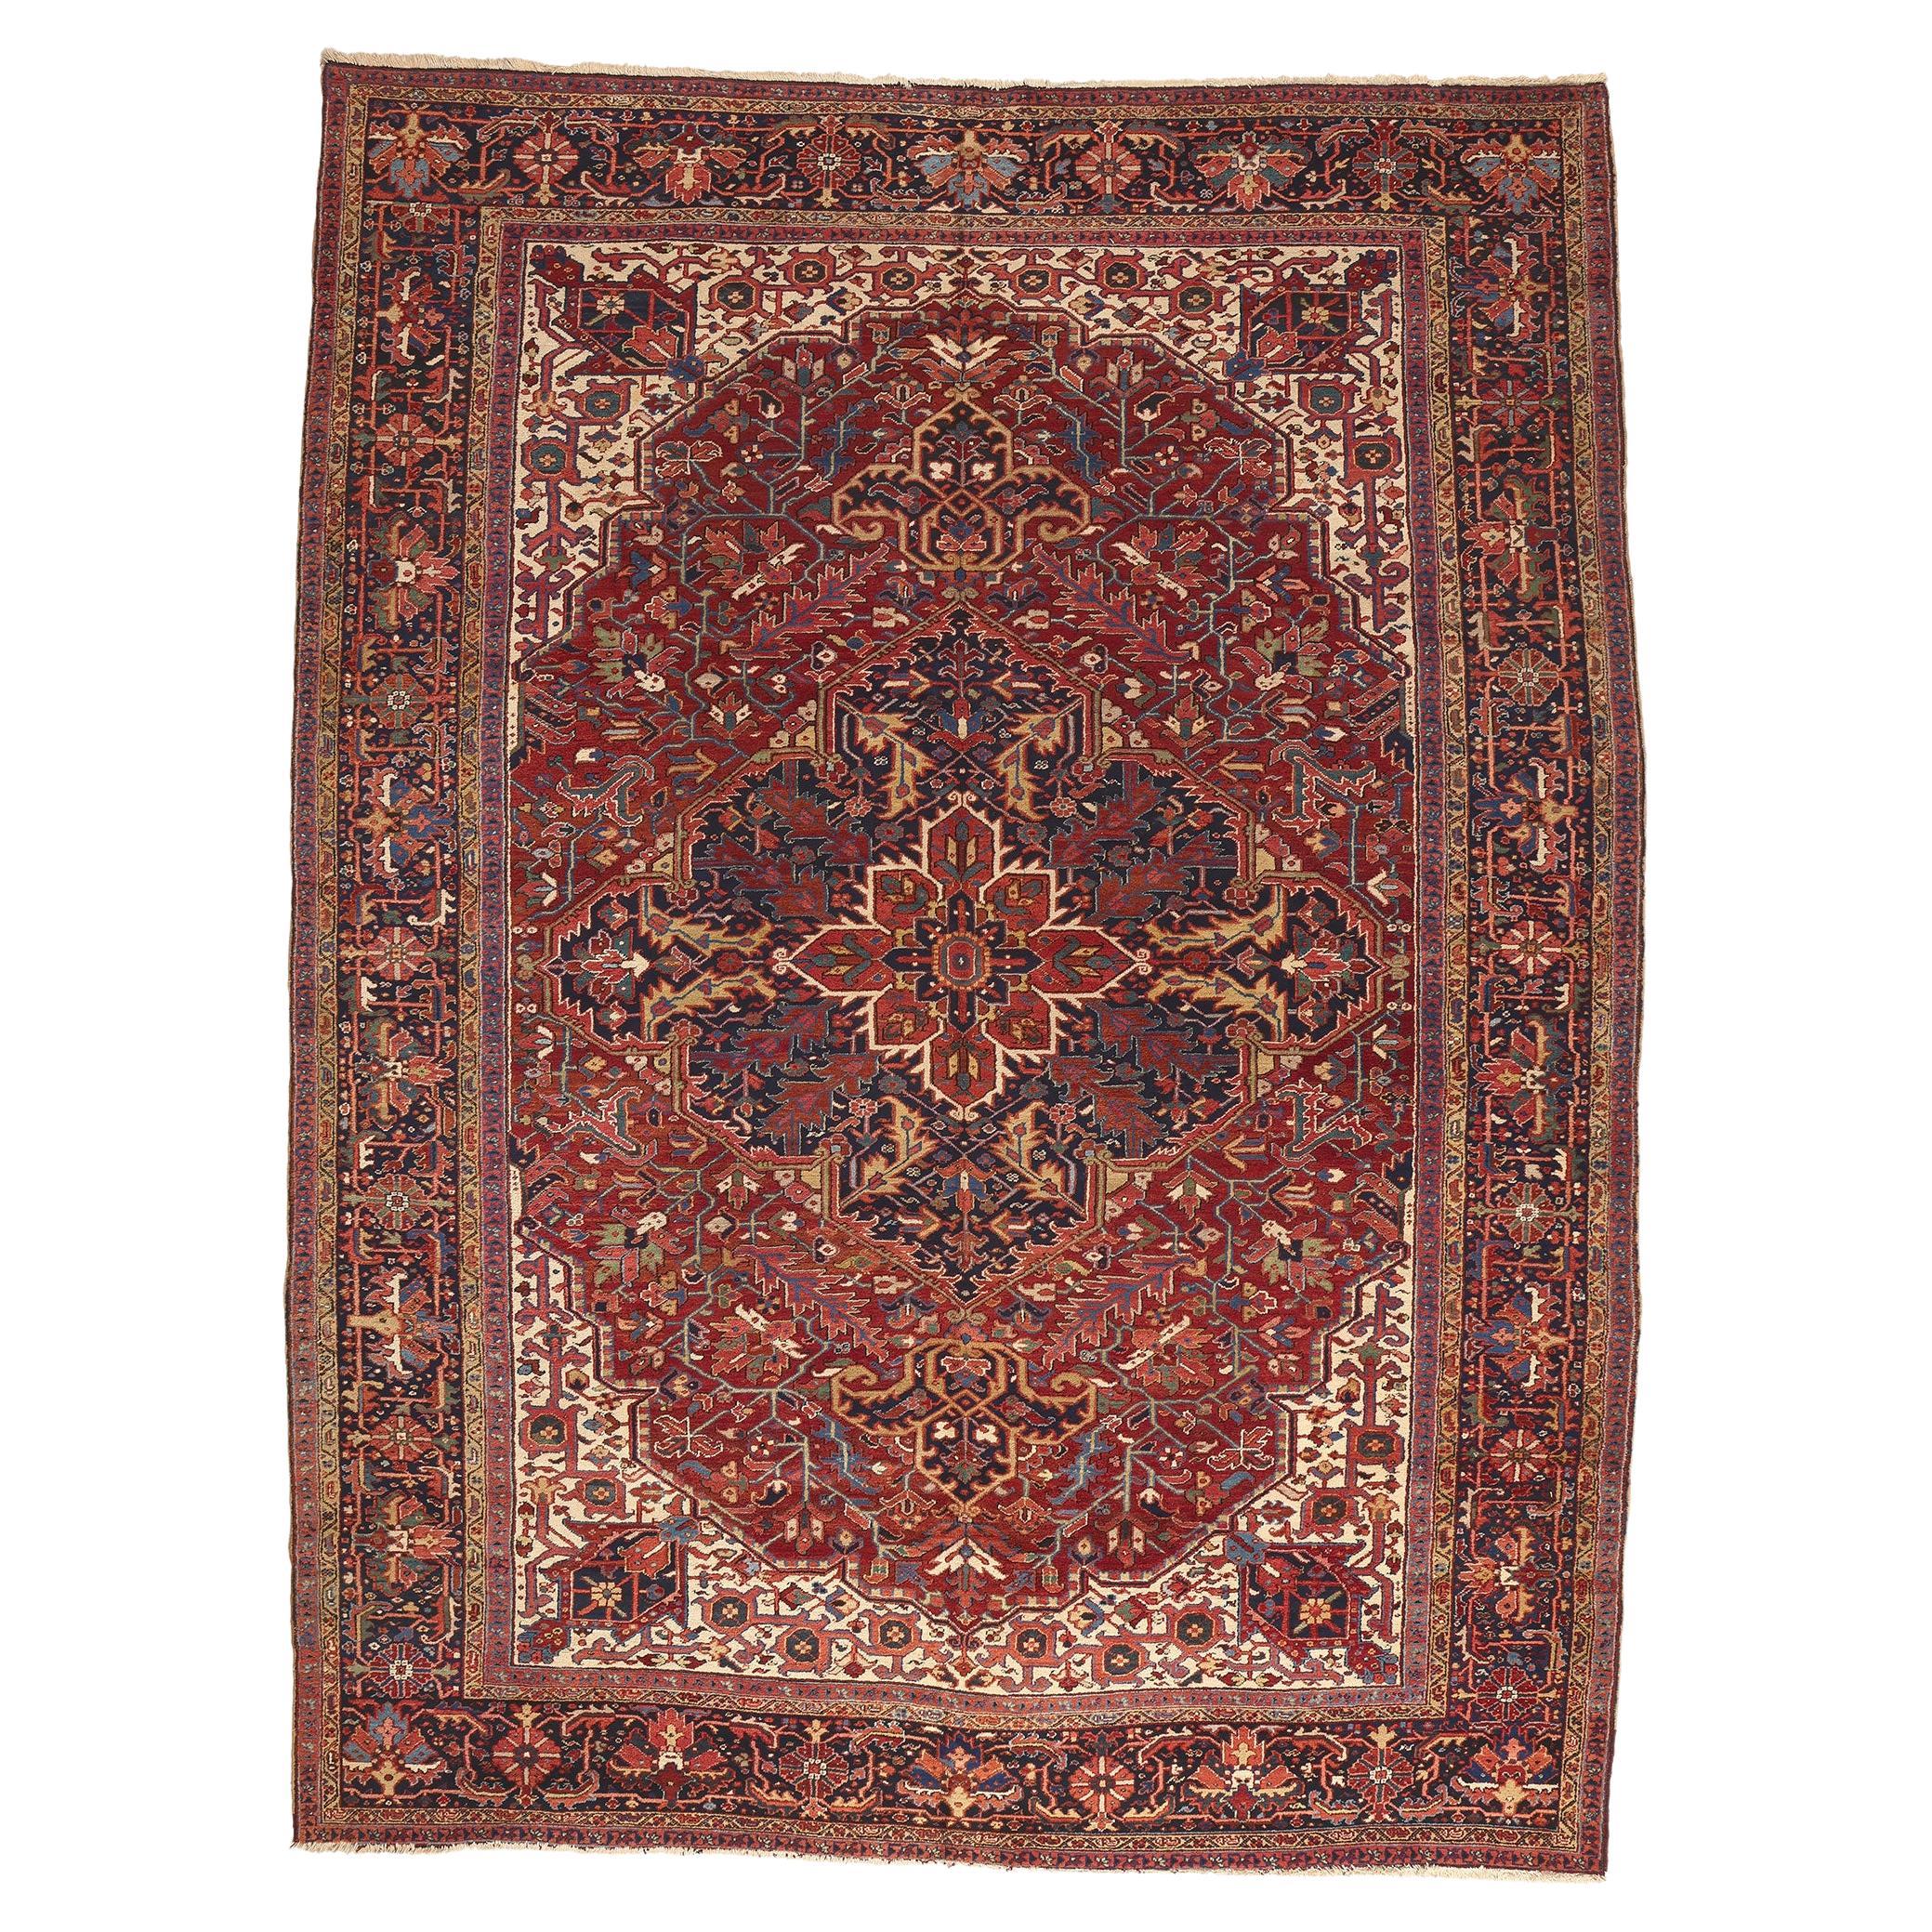 1920s Extra-Large Antique Red Persian Rug Heriz Carpet  For Sale